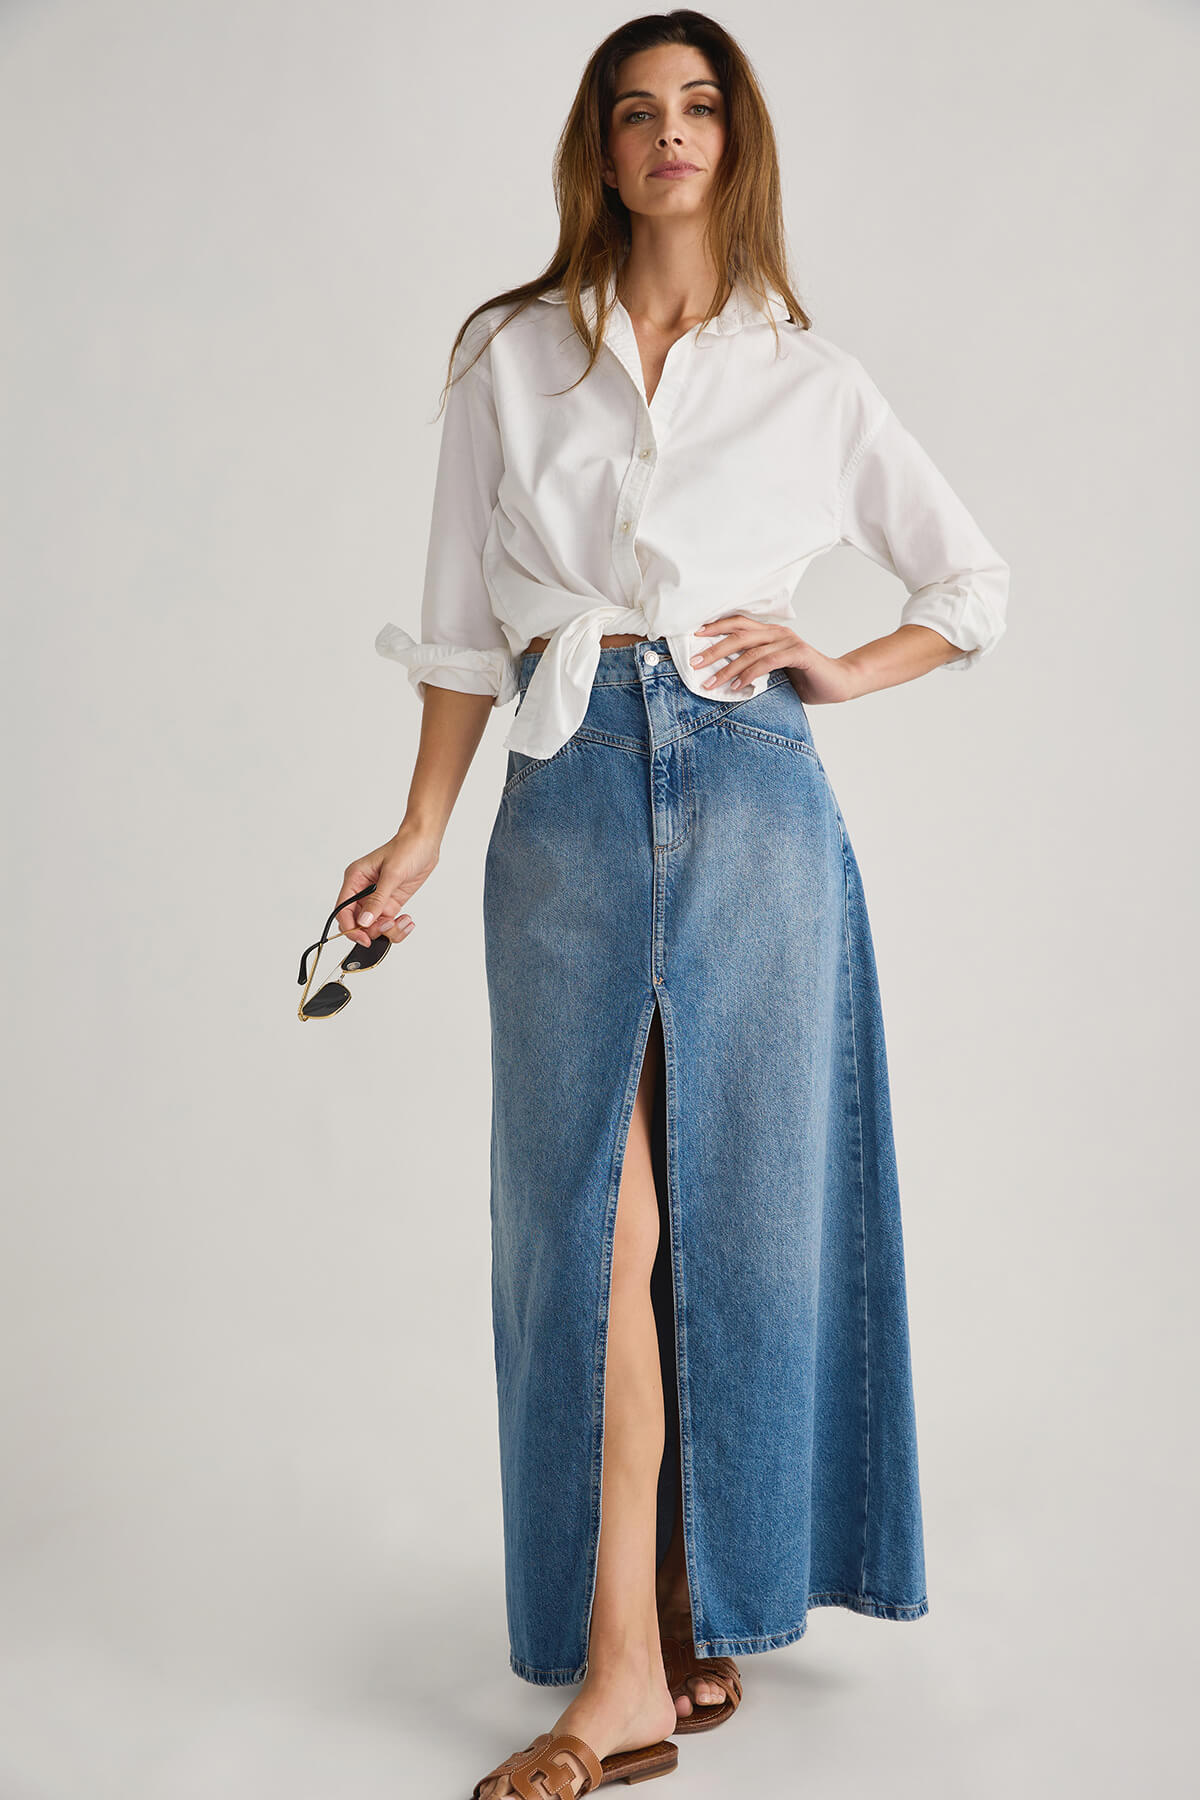 Free People Come As You Are Denim Skirt